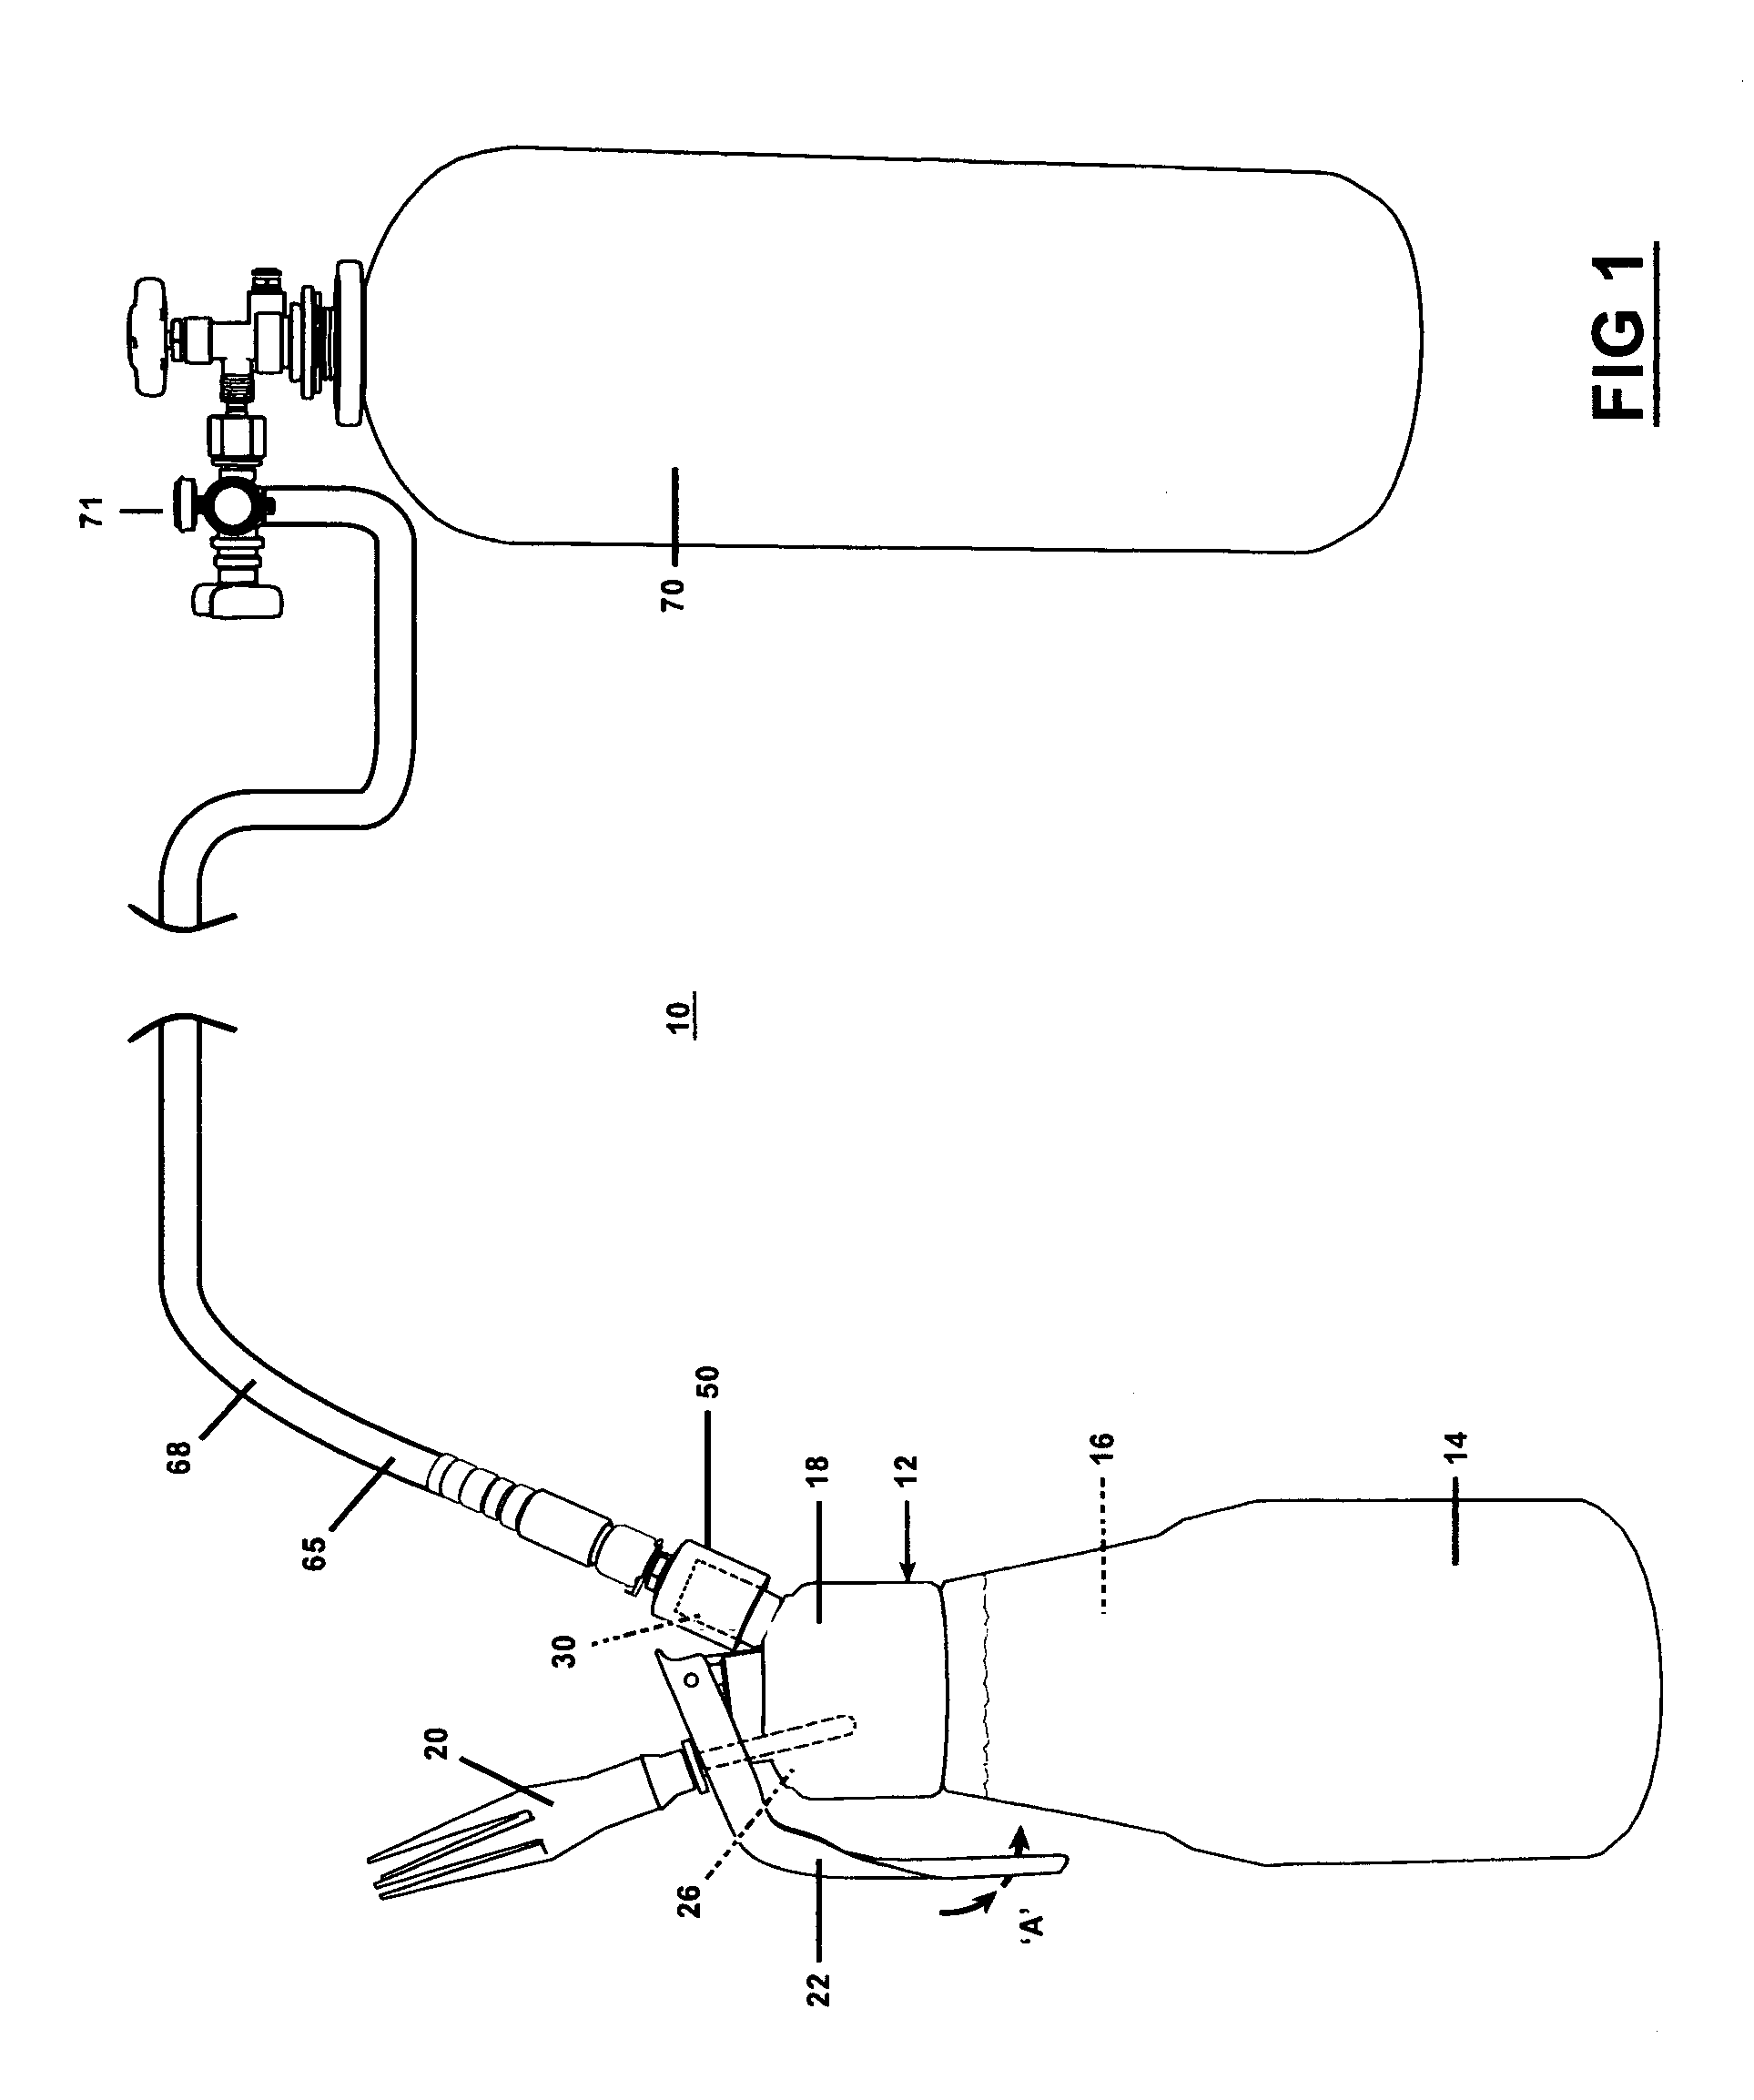 Remote pressure system for portable whipped cream dispensers